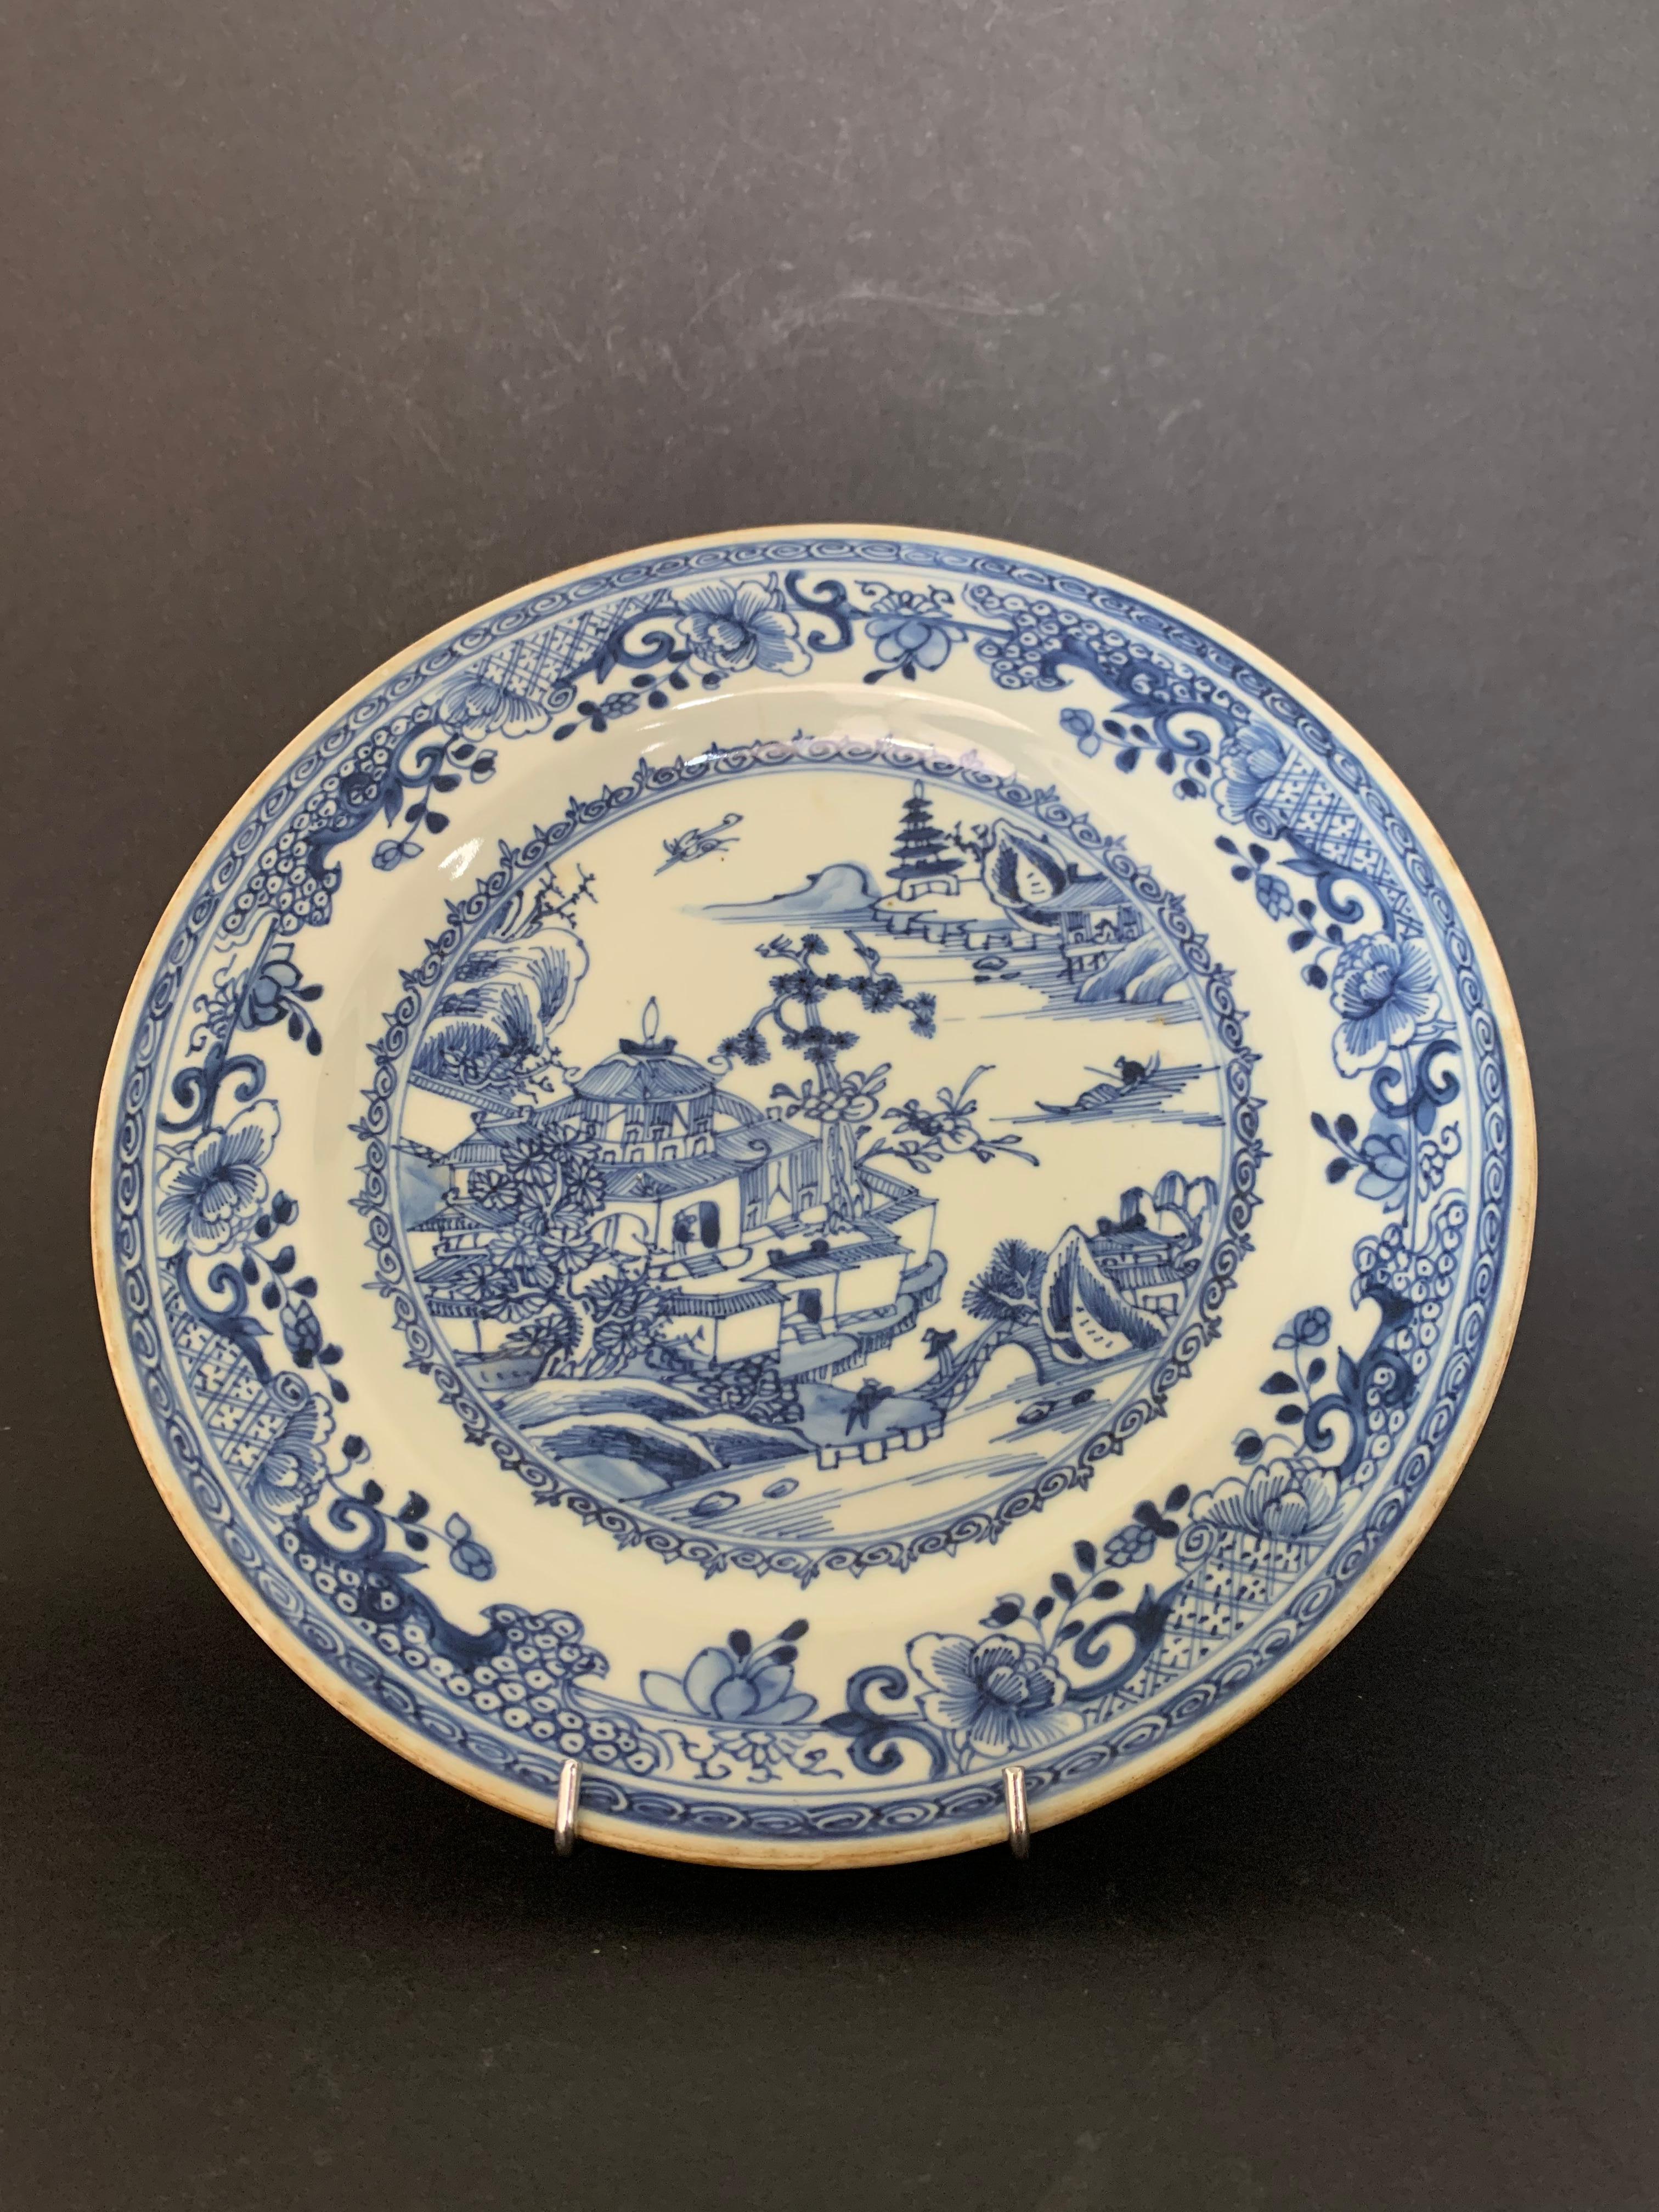 Nice plate inspired the Compagnie des Indes from the Qianlong period, XVIIIth century, But dating from the 19th Century. 
It presents a decoration of pagoda, lake landscape and flowering trees. This porcelain is characteristic of the blue family.